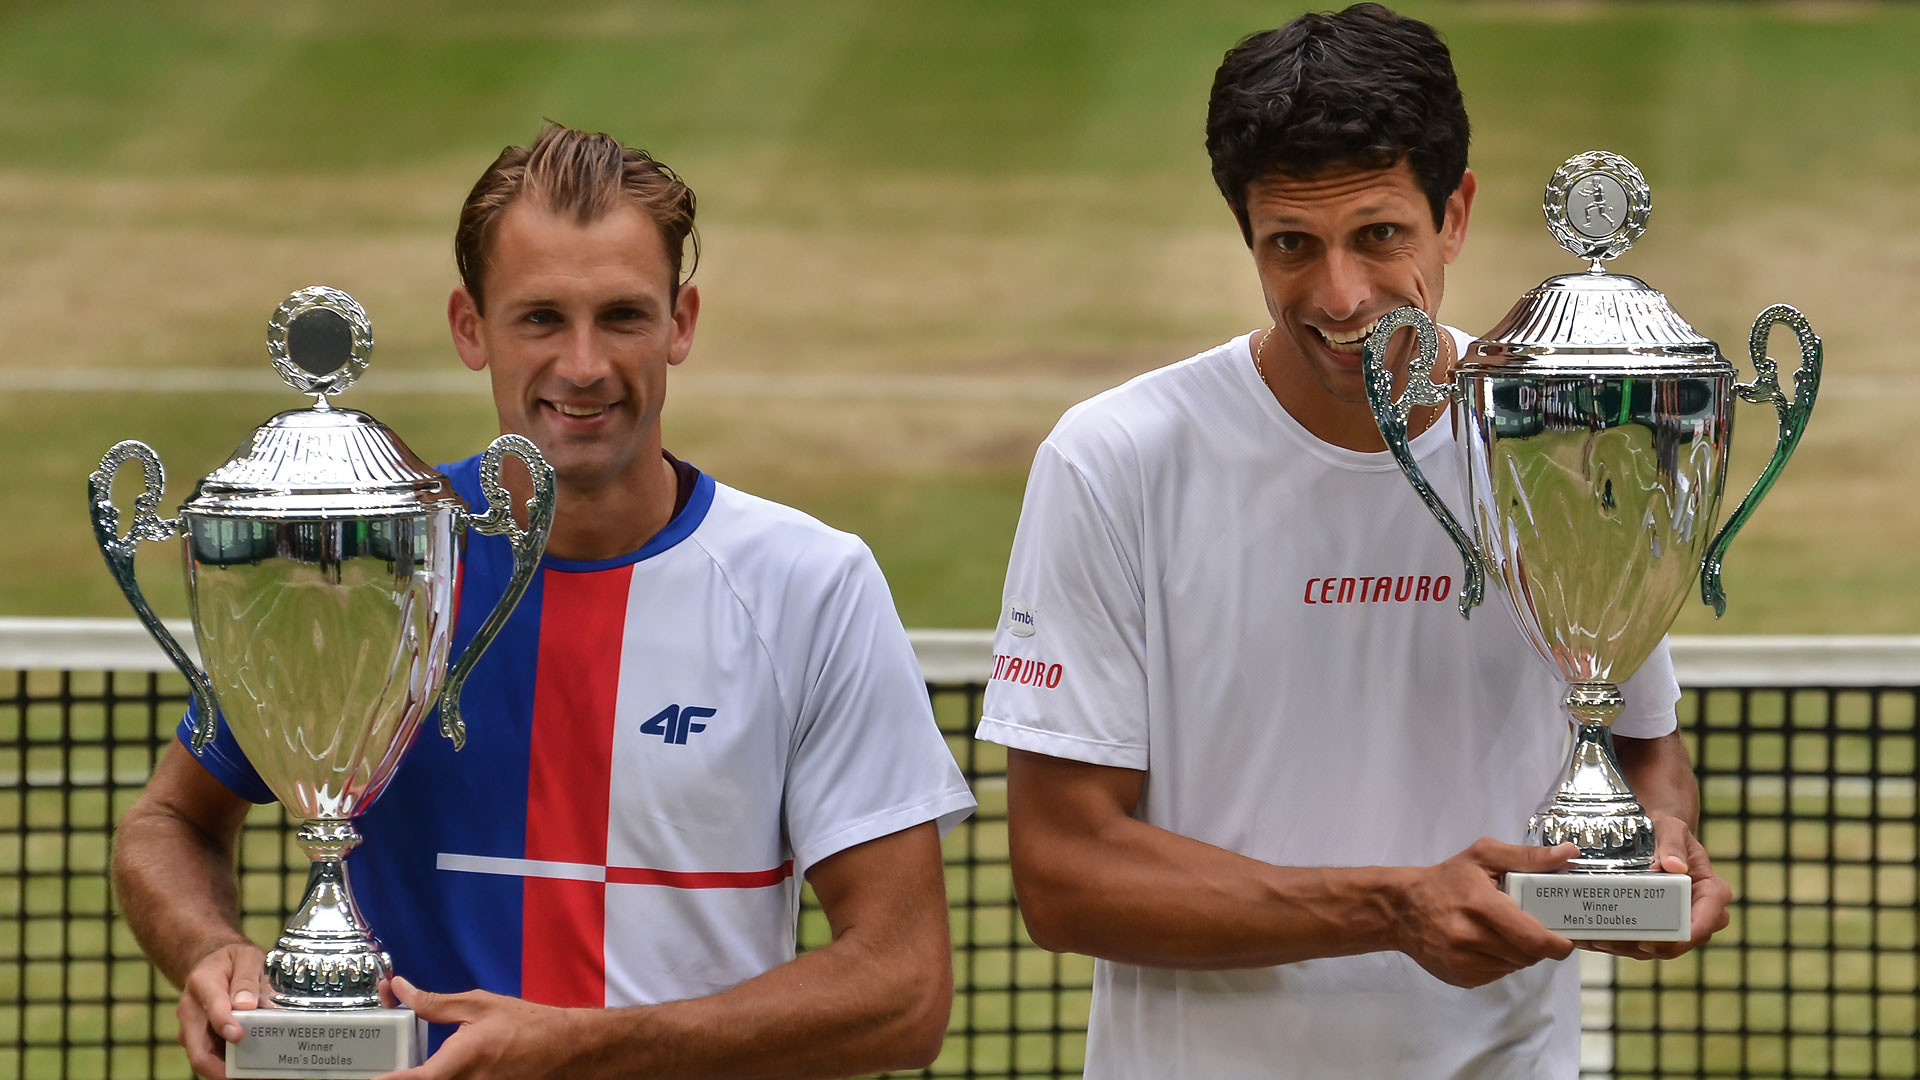 1920x1080 Kubot/Melo Stay Unbeaten On Grass With Halle Title | ATP World Tour | Tennis